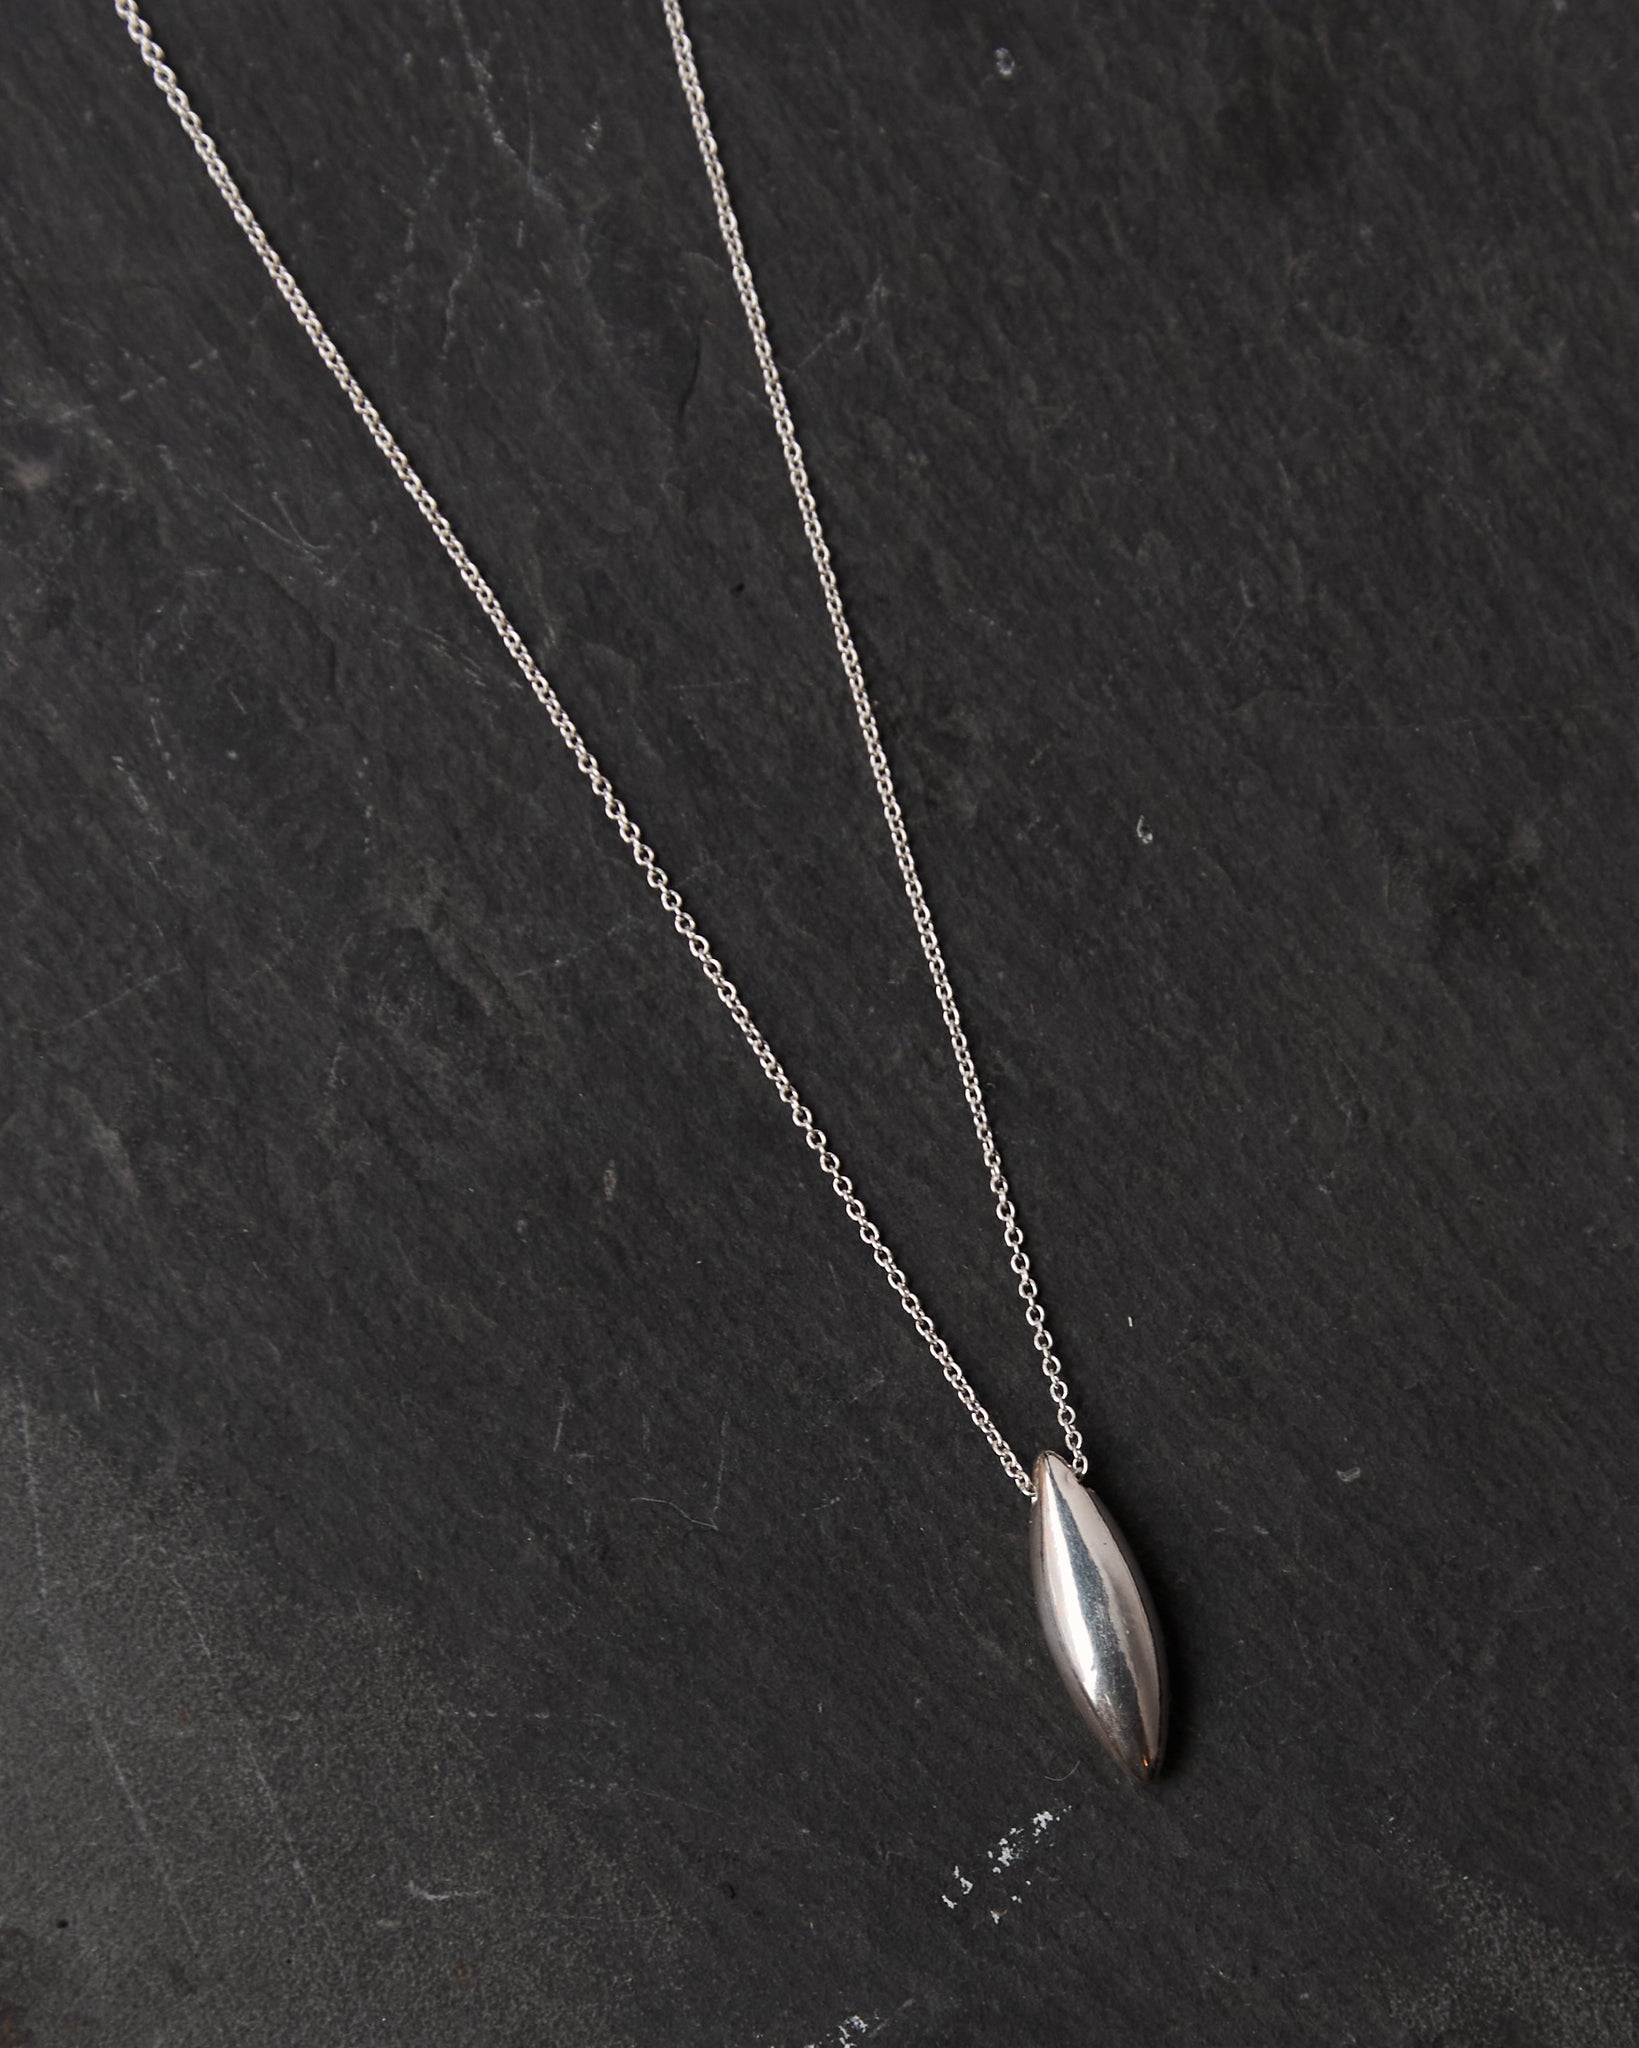 Another Feather Small Ore Drop Necklace, Silver